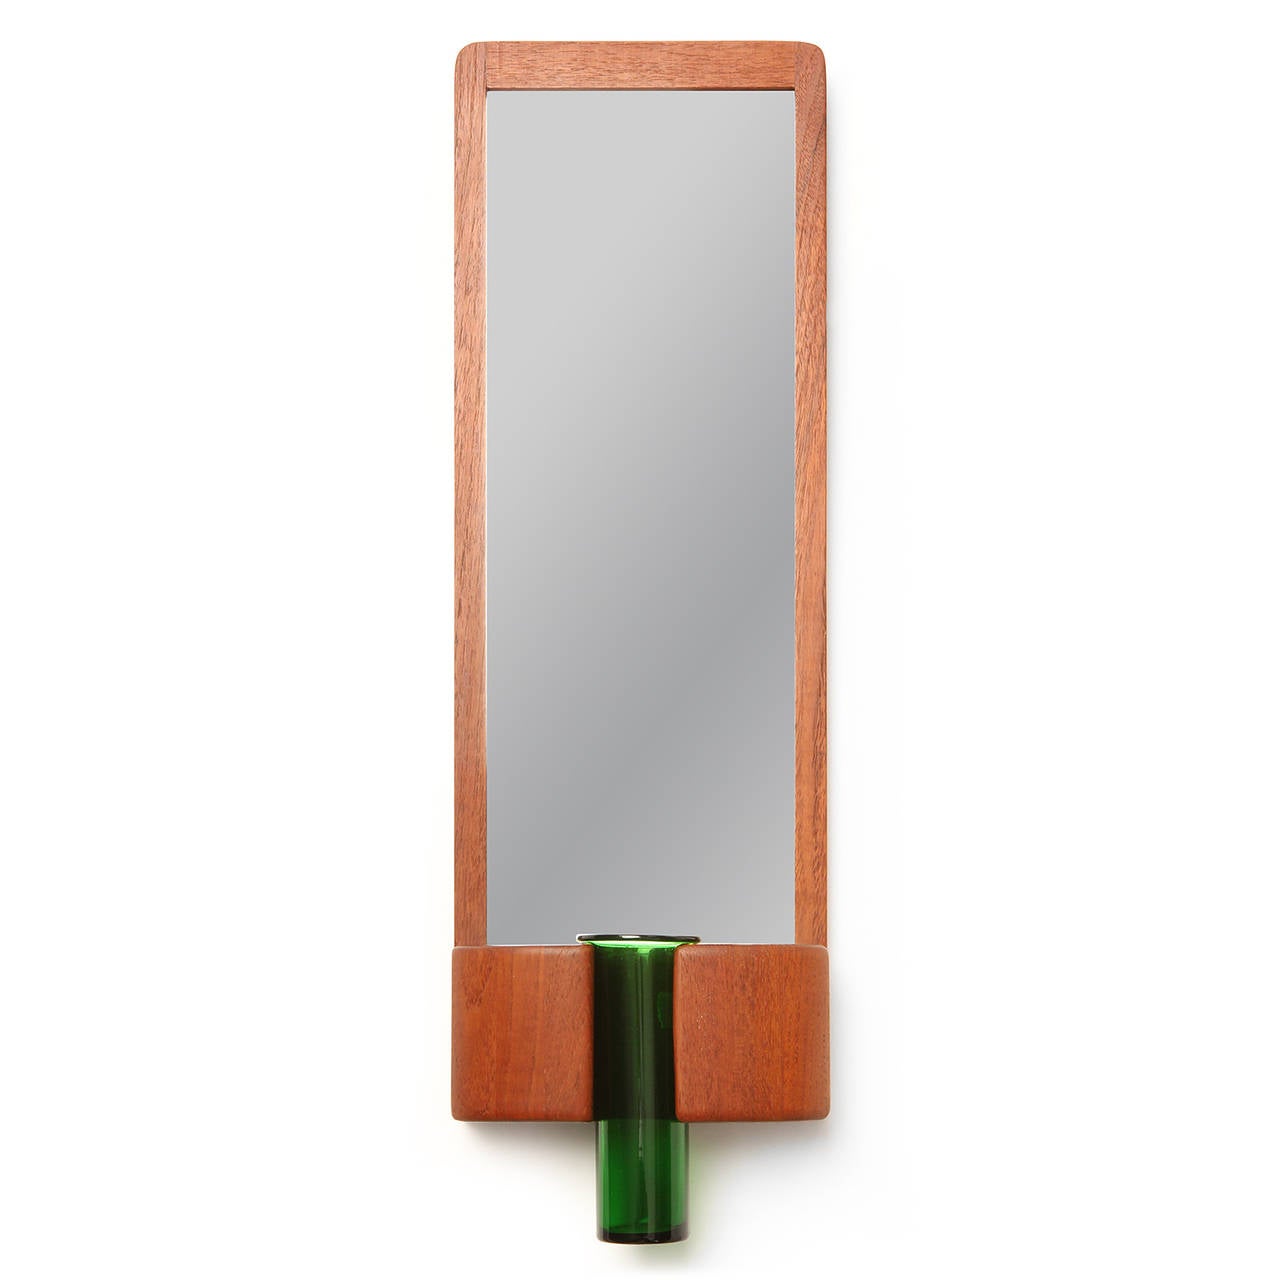 A spare and elegant teak mirror having a staved sculptural receptacle at the base holding a luminous and expressive green glass vase by Holmegaard.